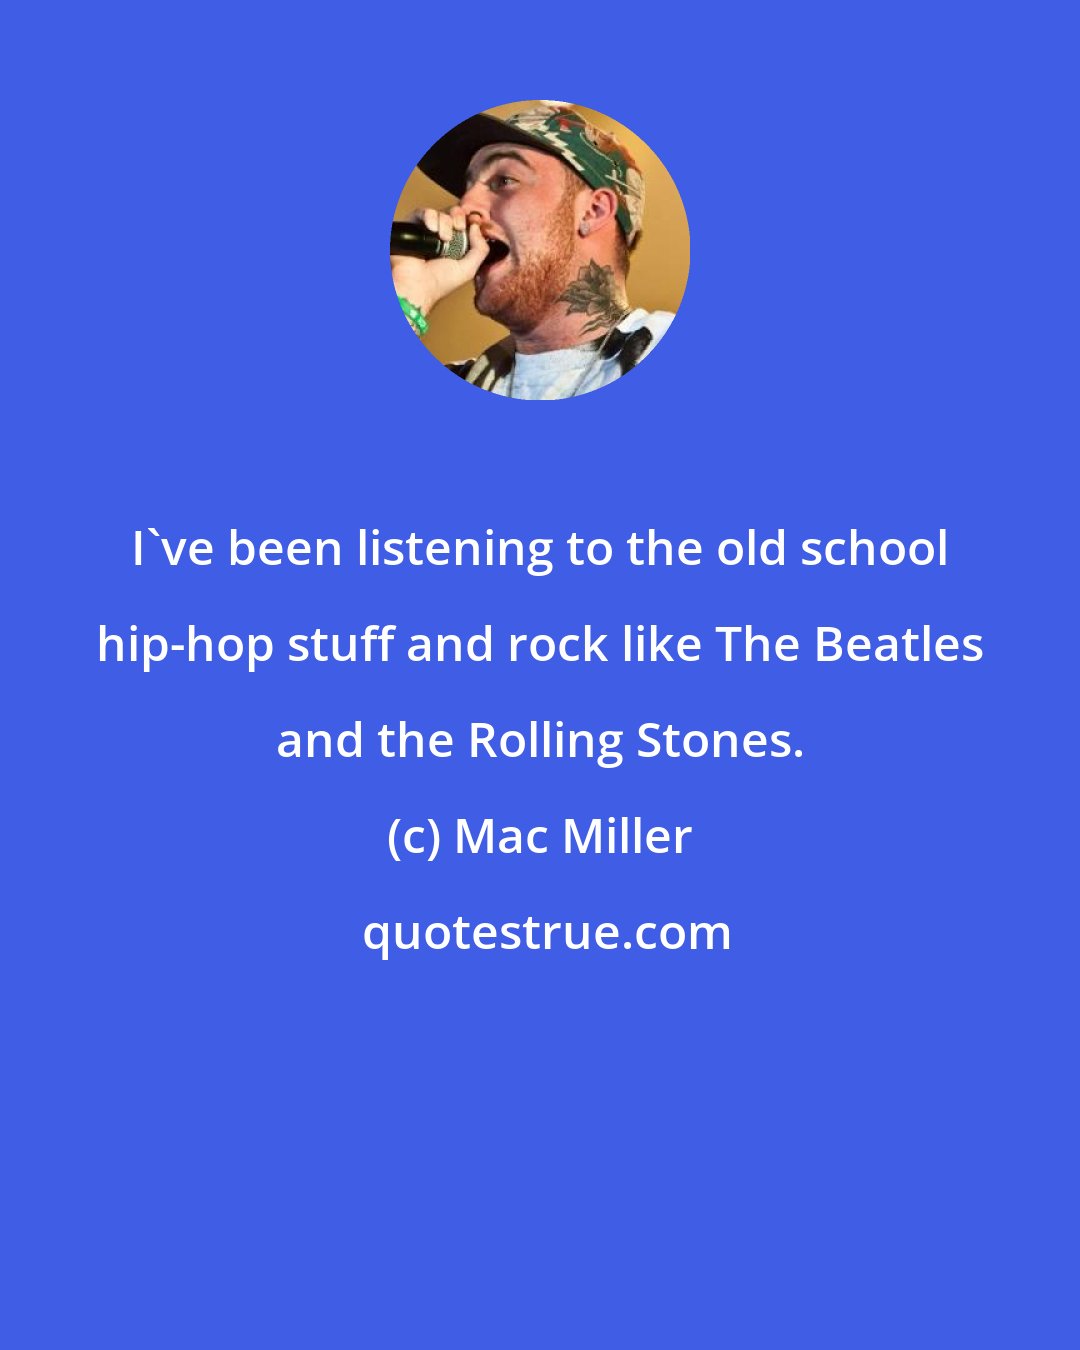 Mac Miller: I've been listening to the old school hip-hop stuff and rock like The Beatles and the Rolling Stones.